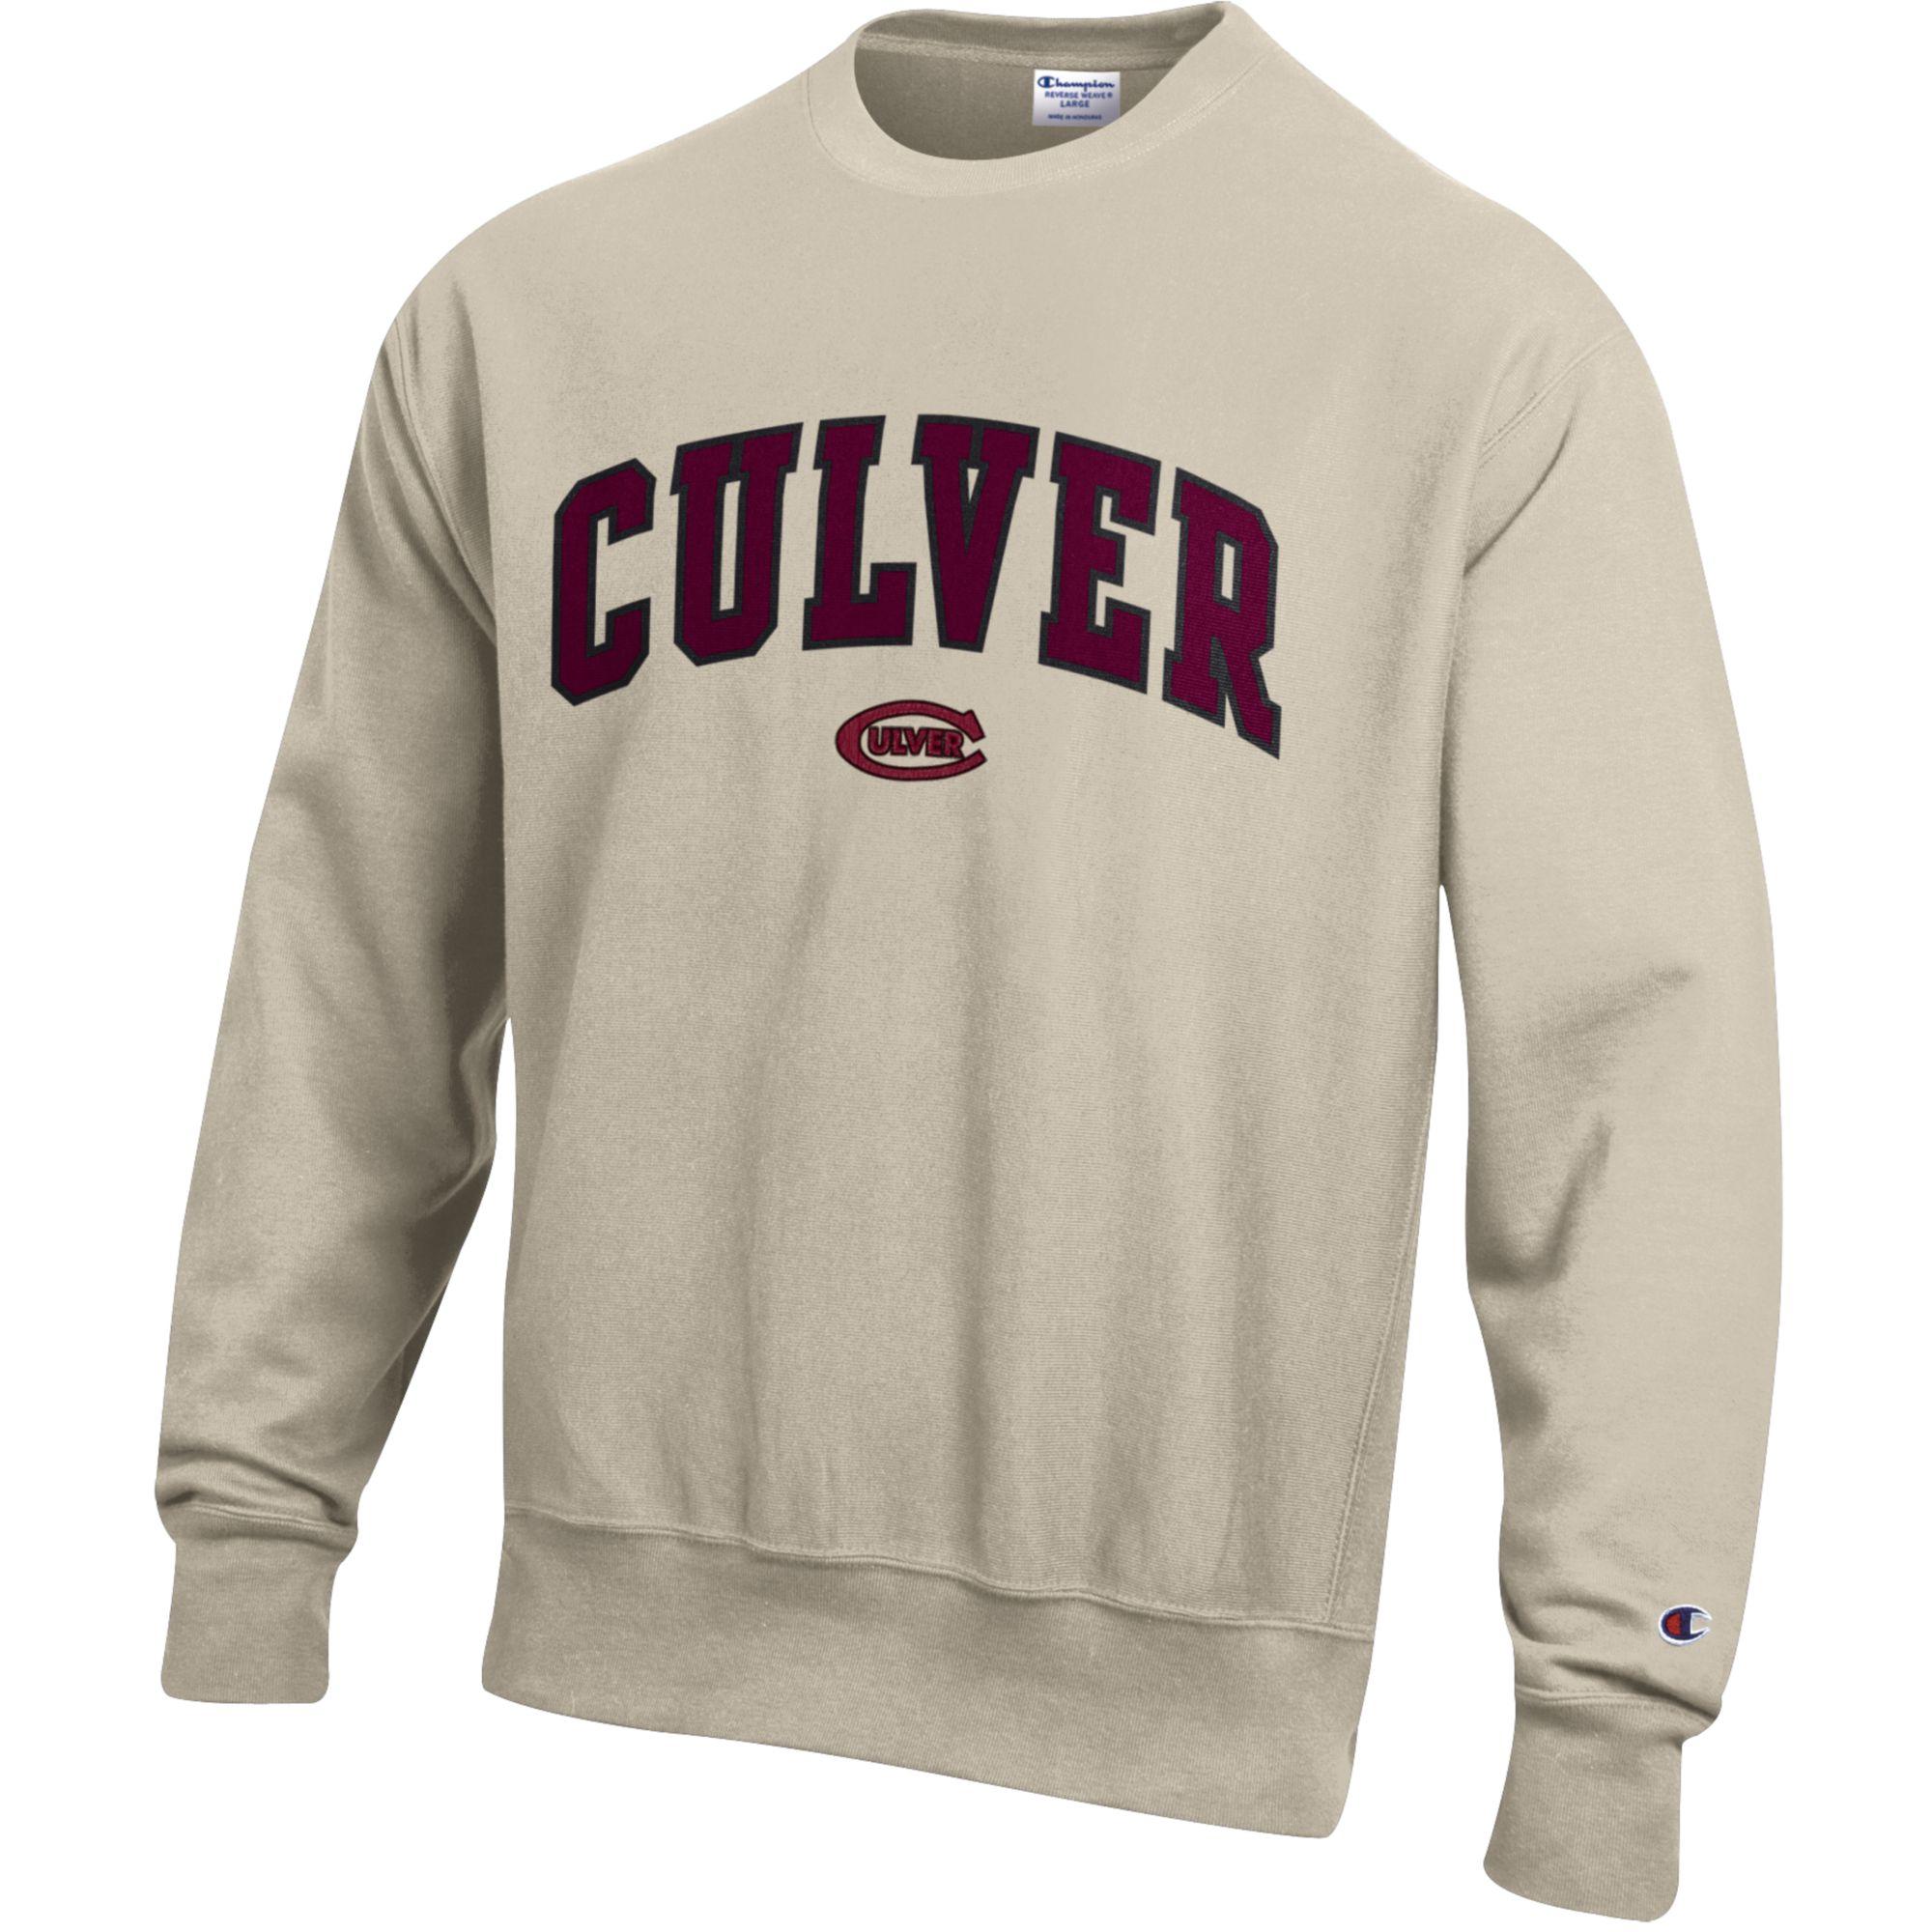 Champion Culver Reverse Weave Crew - Oatmeal Heather